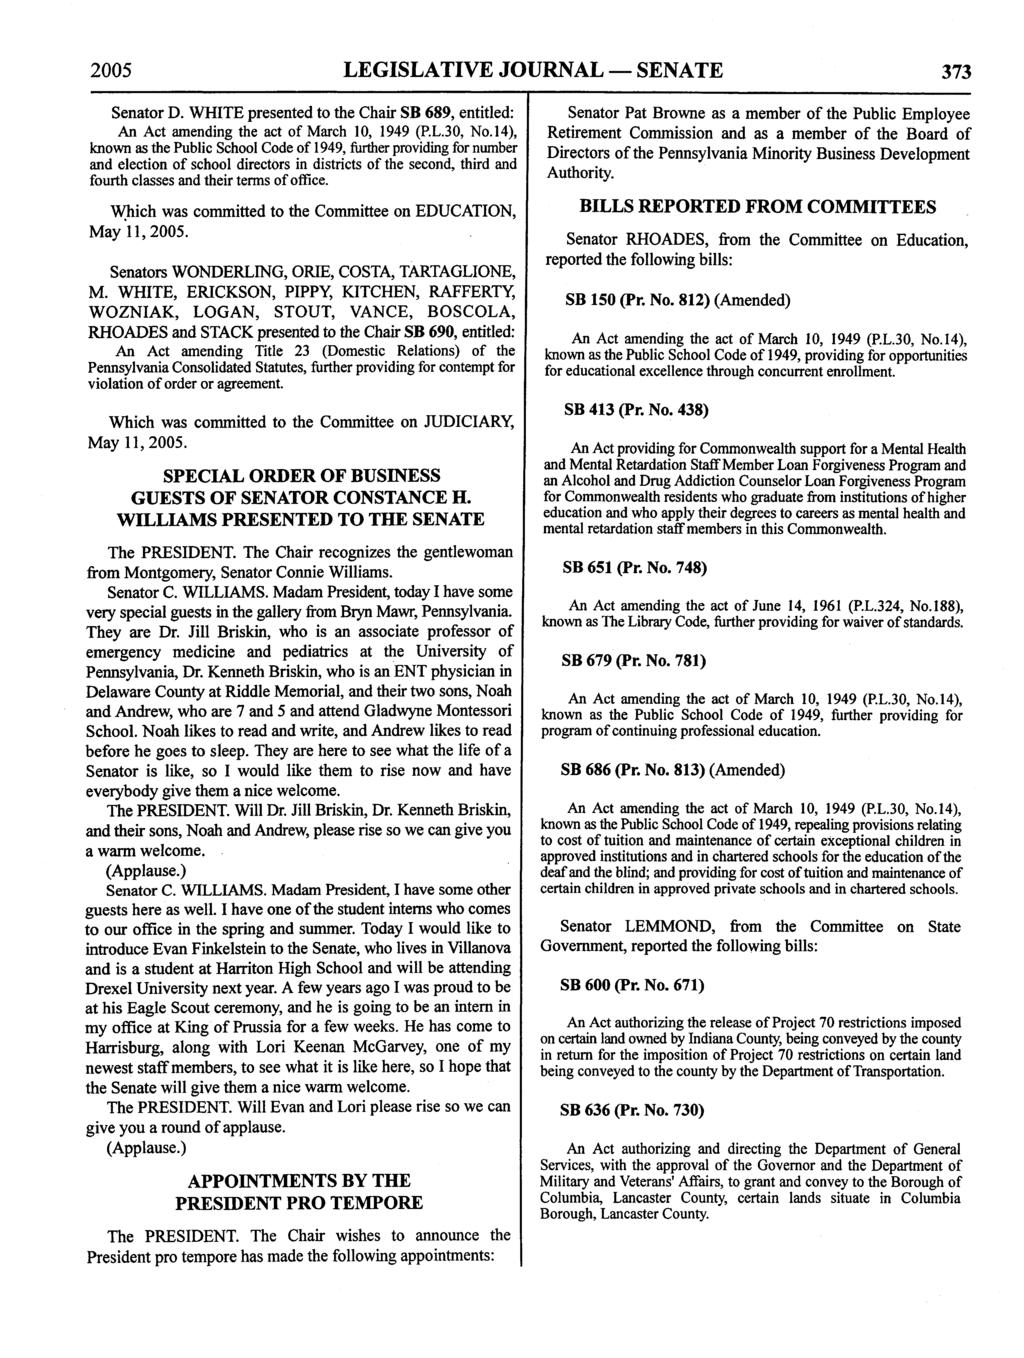 2005 LEGISLATIVE JOURNAL SENATE 373 Senator D. WHITE presented to the Chair SB 689, entitled: An Act amending the act of March 10, 1949 (P.L.30, No.